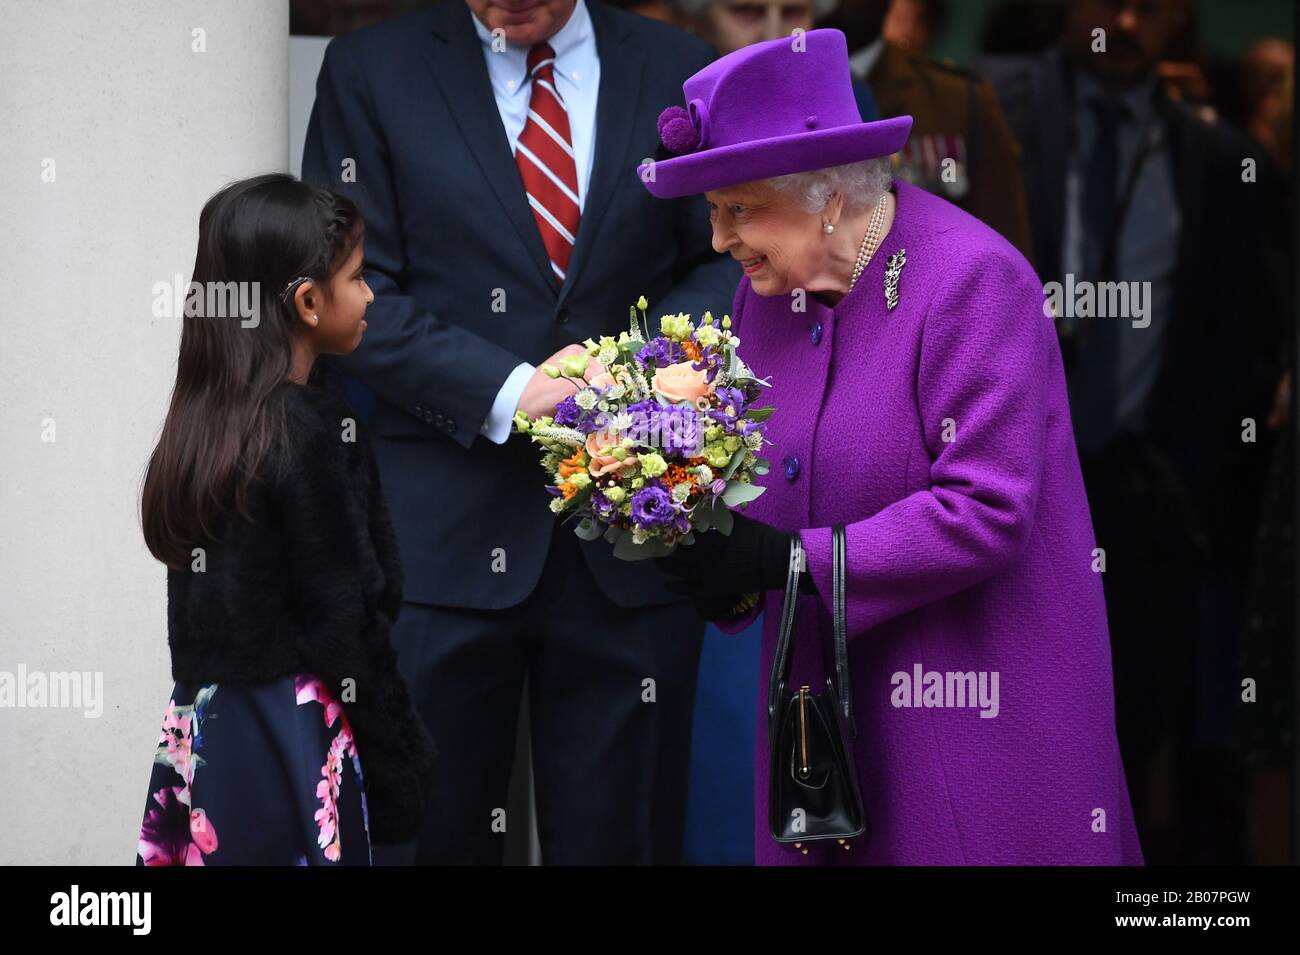 Queen Elizabeth II receives a bouquet from a young girl as she leaves after officially opening the new premises of the Royal National ENT and Eastman Dental Hospitals in London. PA Photo. Picture date: Wednesday February 19, 2020. See PA story ROYAL Queen. Photo credit should read: Victoria Jones/PA Wire Stock Photo